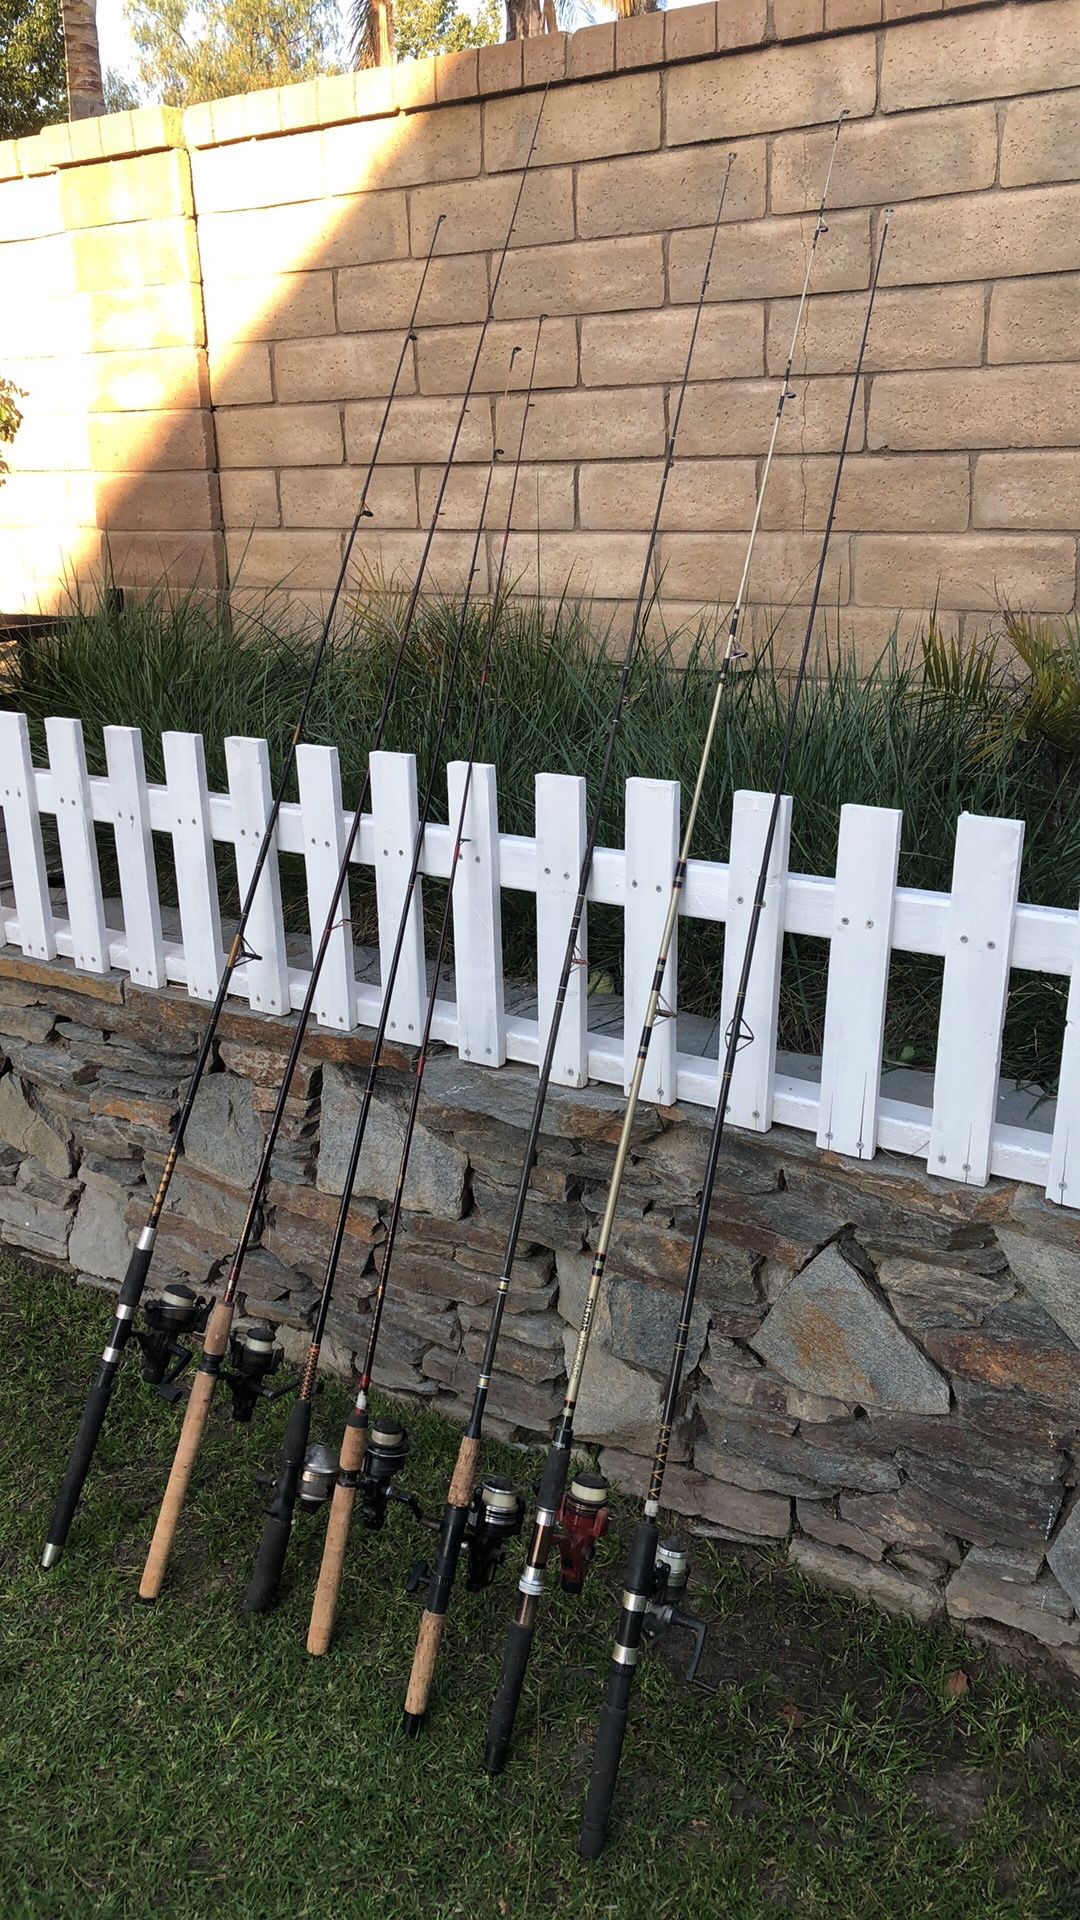 SEVEN (7) Fishing Rods with Reels